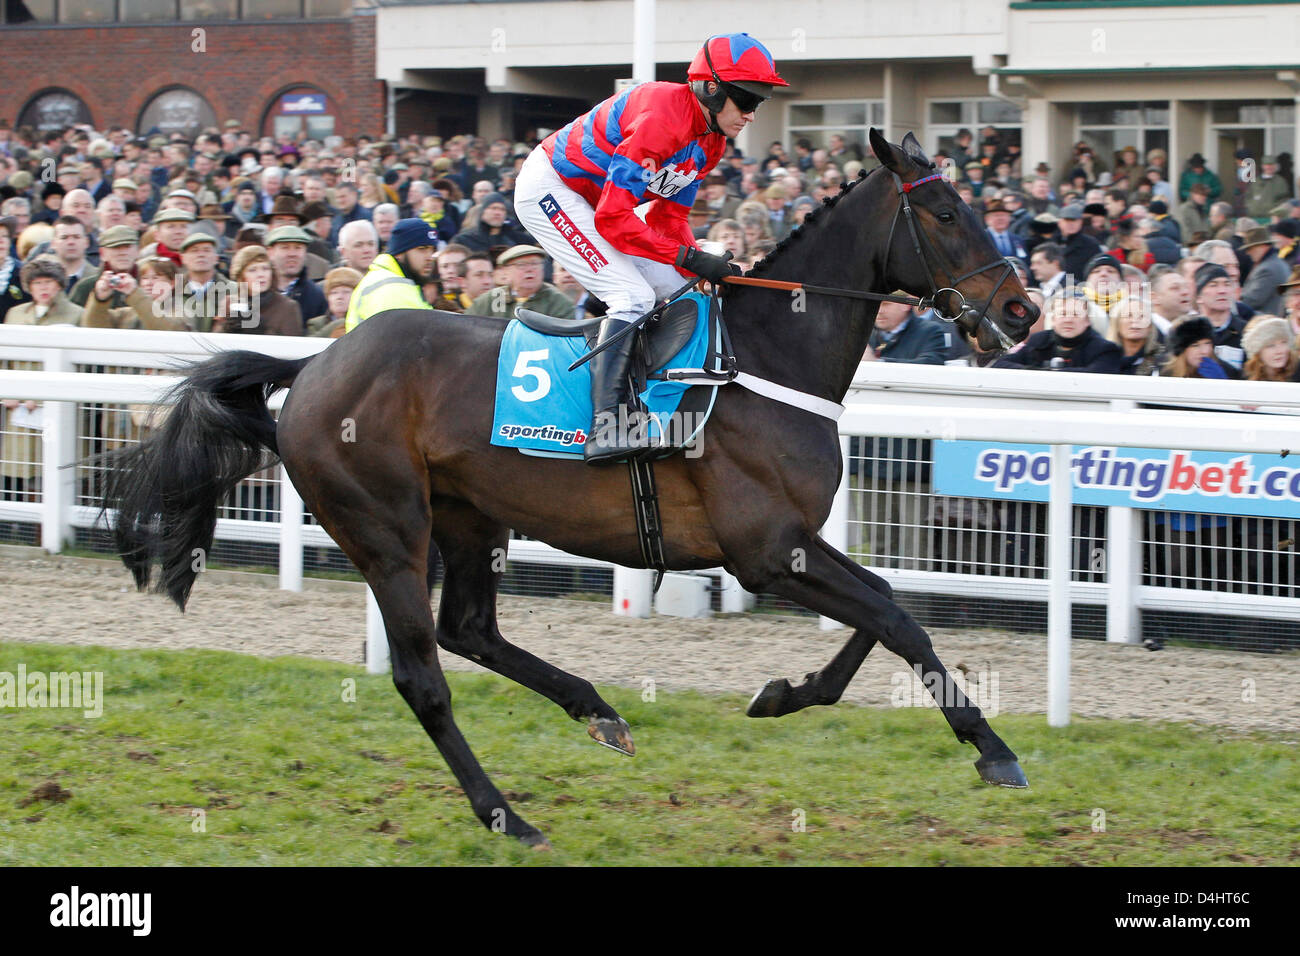 Cheltenham, UK. 13th March 2013.  Sprinter Sacre, ridden by Barry Geraghty on their way to the start for the sportingbet.com Queen Mother Champion Chase Grade 1. Credit:  dpa picture alliance / Alamy Live News Stock Photo